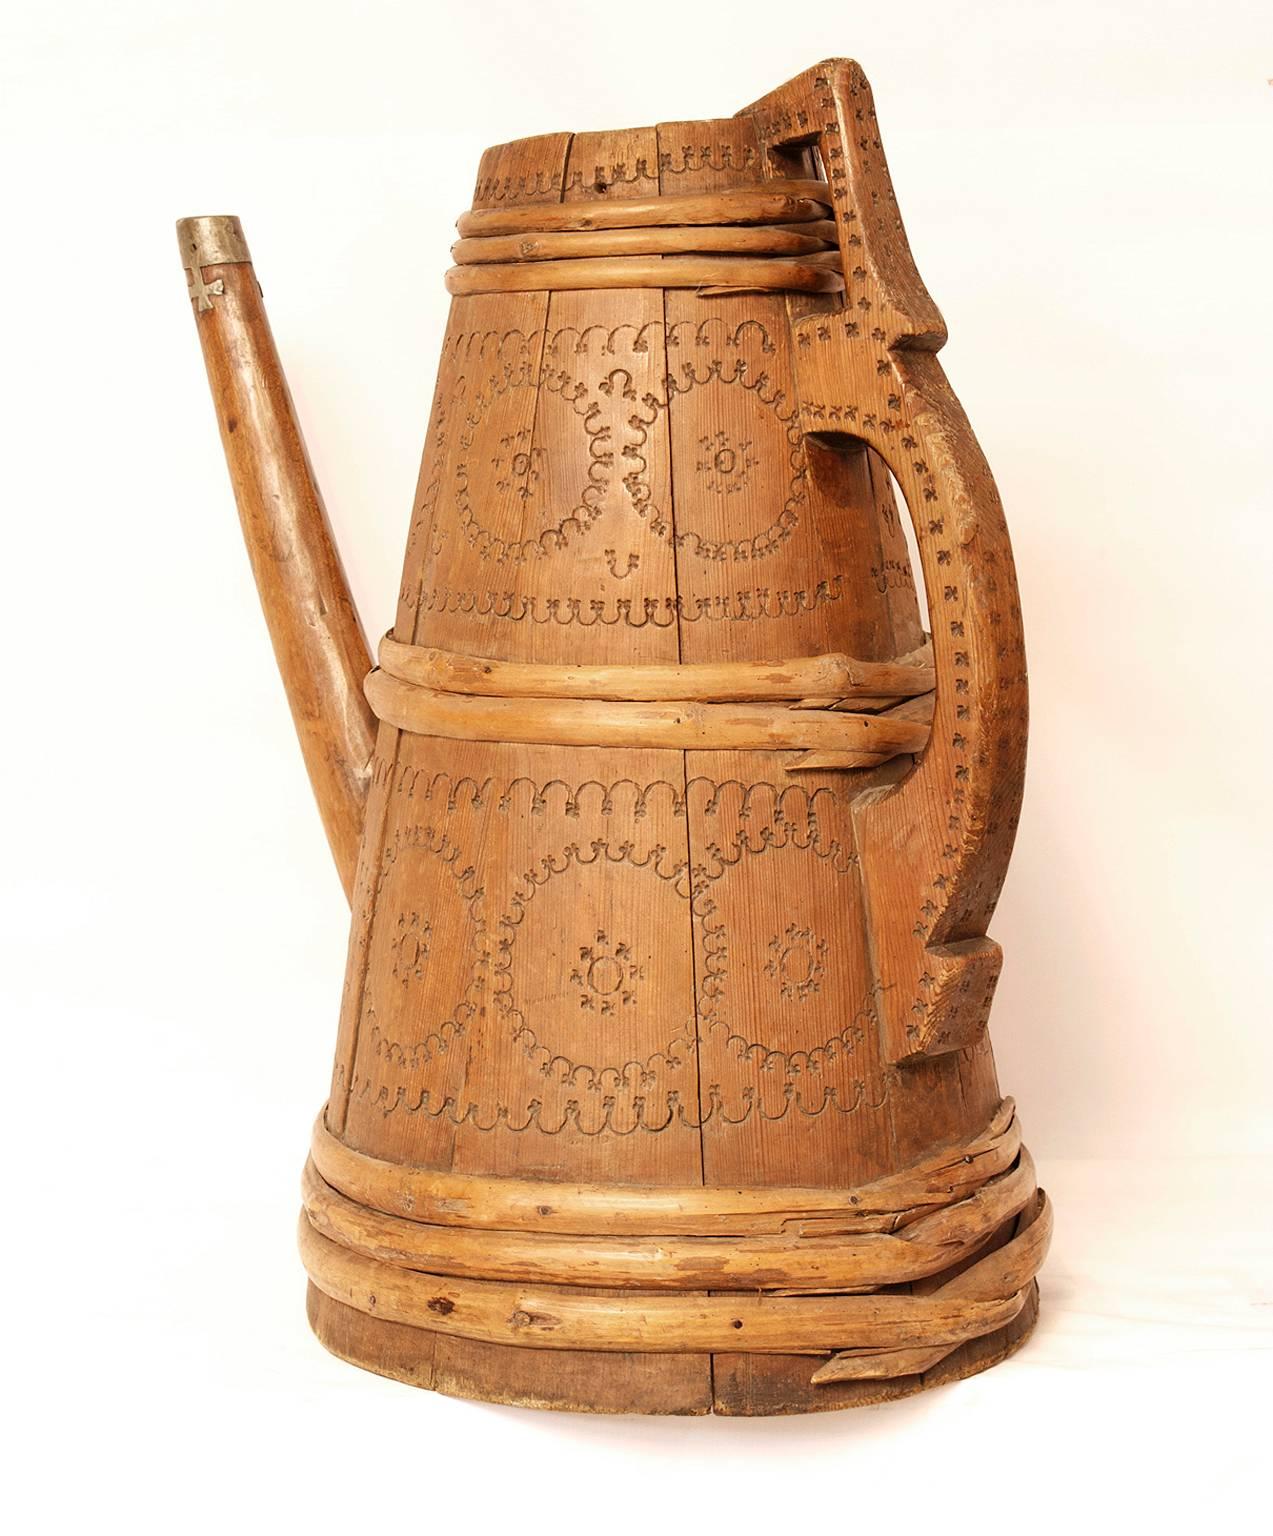 A large and exquisite norwegian drinking vessel or 